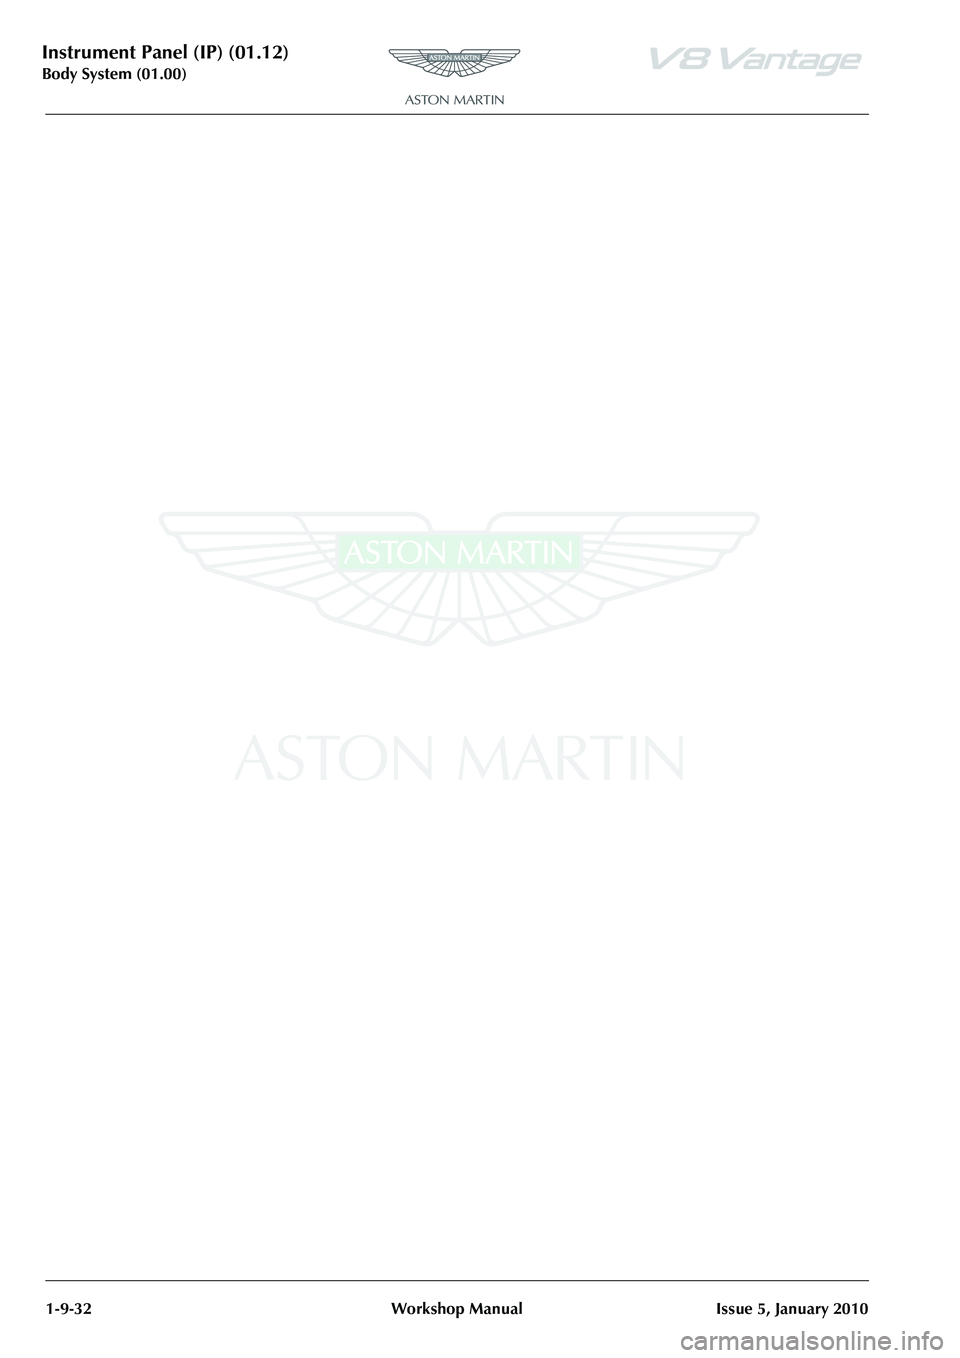 ASTON MARTIN V8 VANTAGE 2010 Owners Guide Instrument Panel (IP) (01.12)
Body System (01.00)1-9-32 Workshop Manual Issue 5, January 2010 